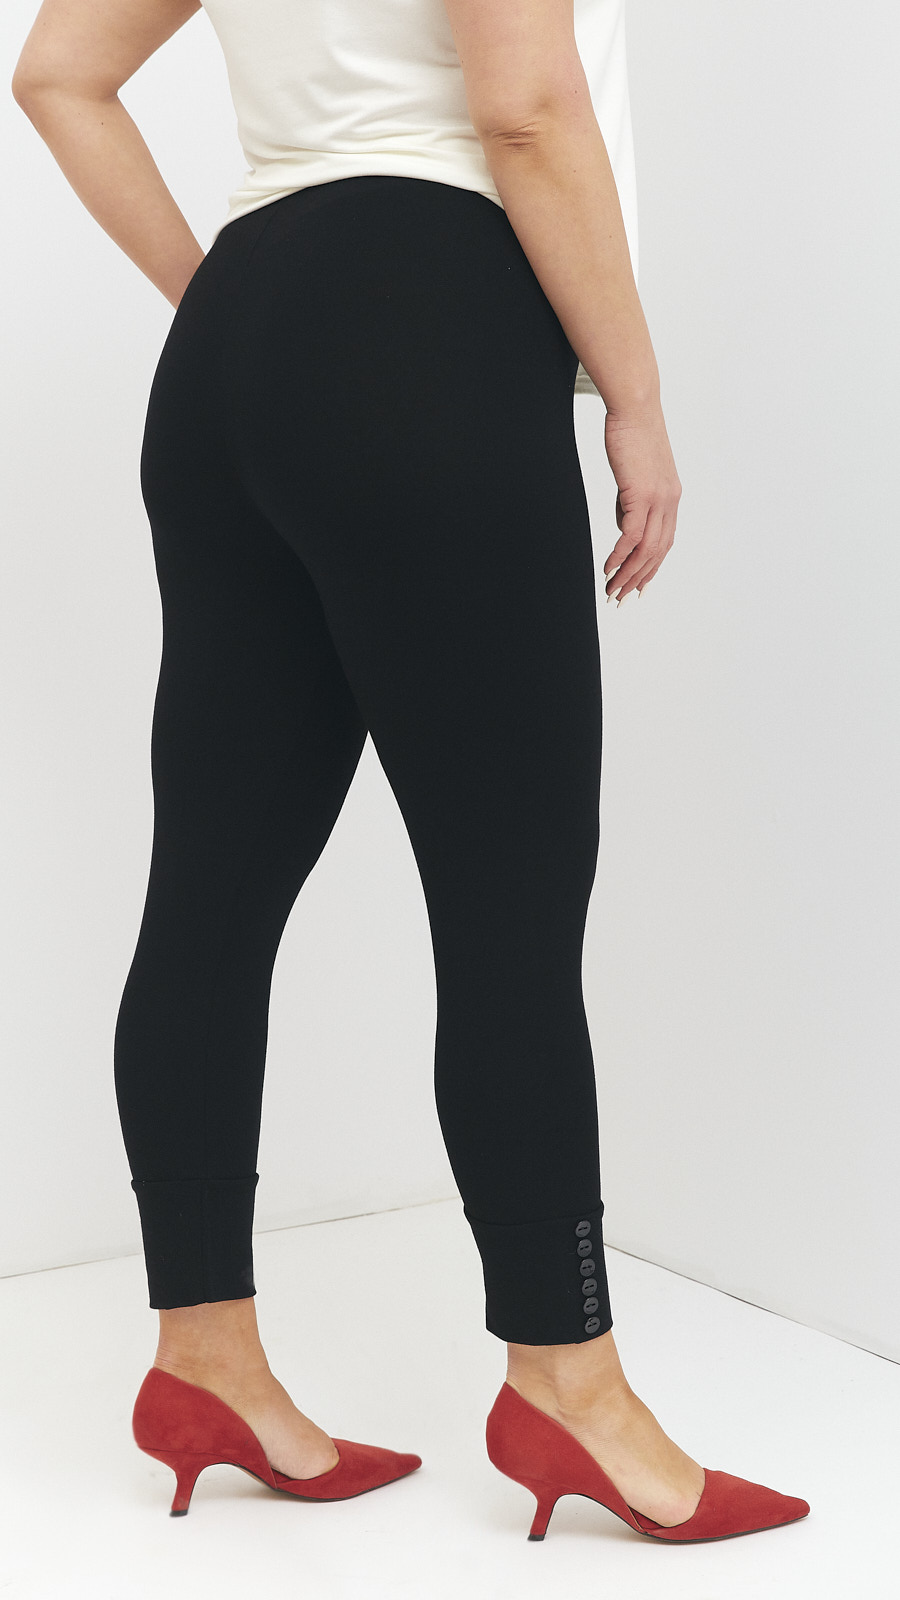 Black stylish comfortable leggings with buttons black